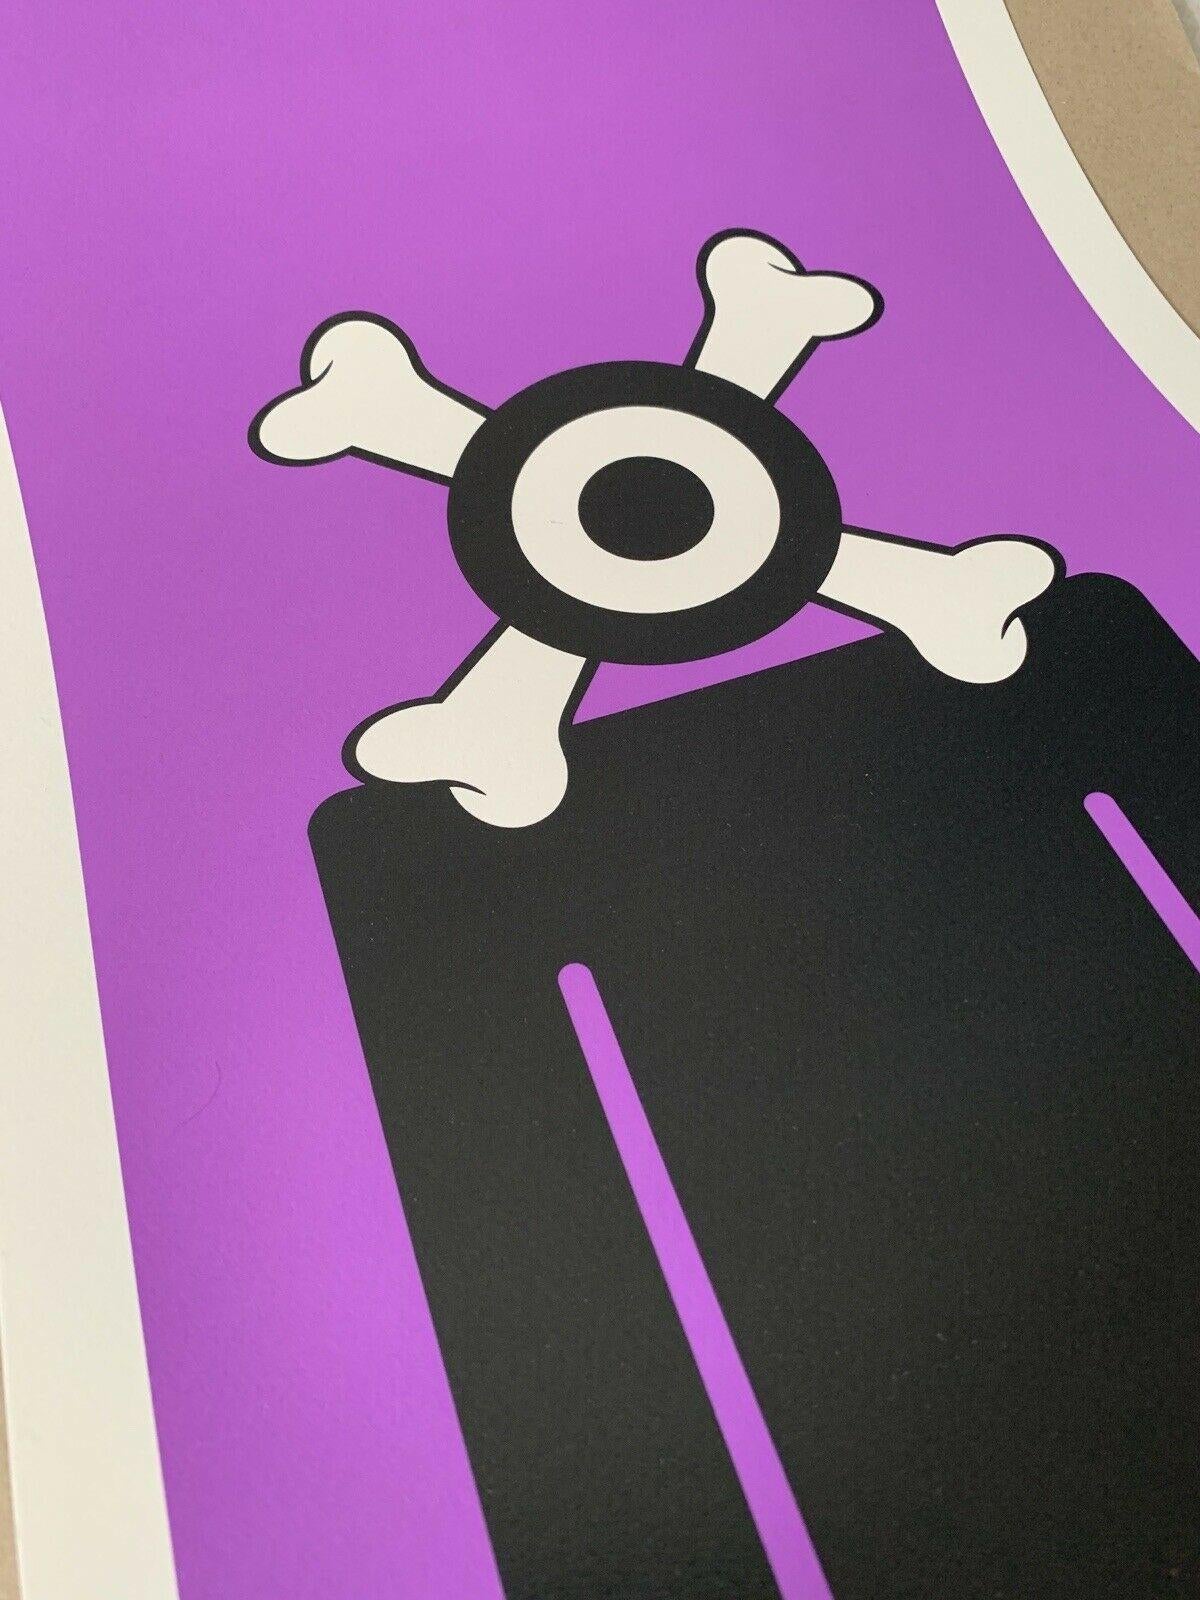 Introducing Purple Pedestrian #4, a stunning 2 colour screenprint by the iconic artist and political activist, Russell Shaw Higgs. This print is part of a limited edition of only 50, making it a highly sought-after piece for any art